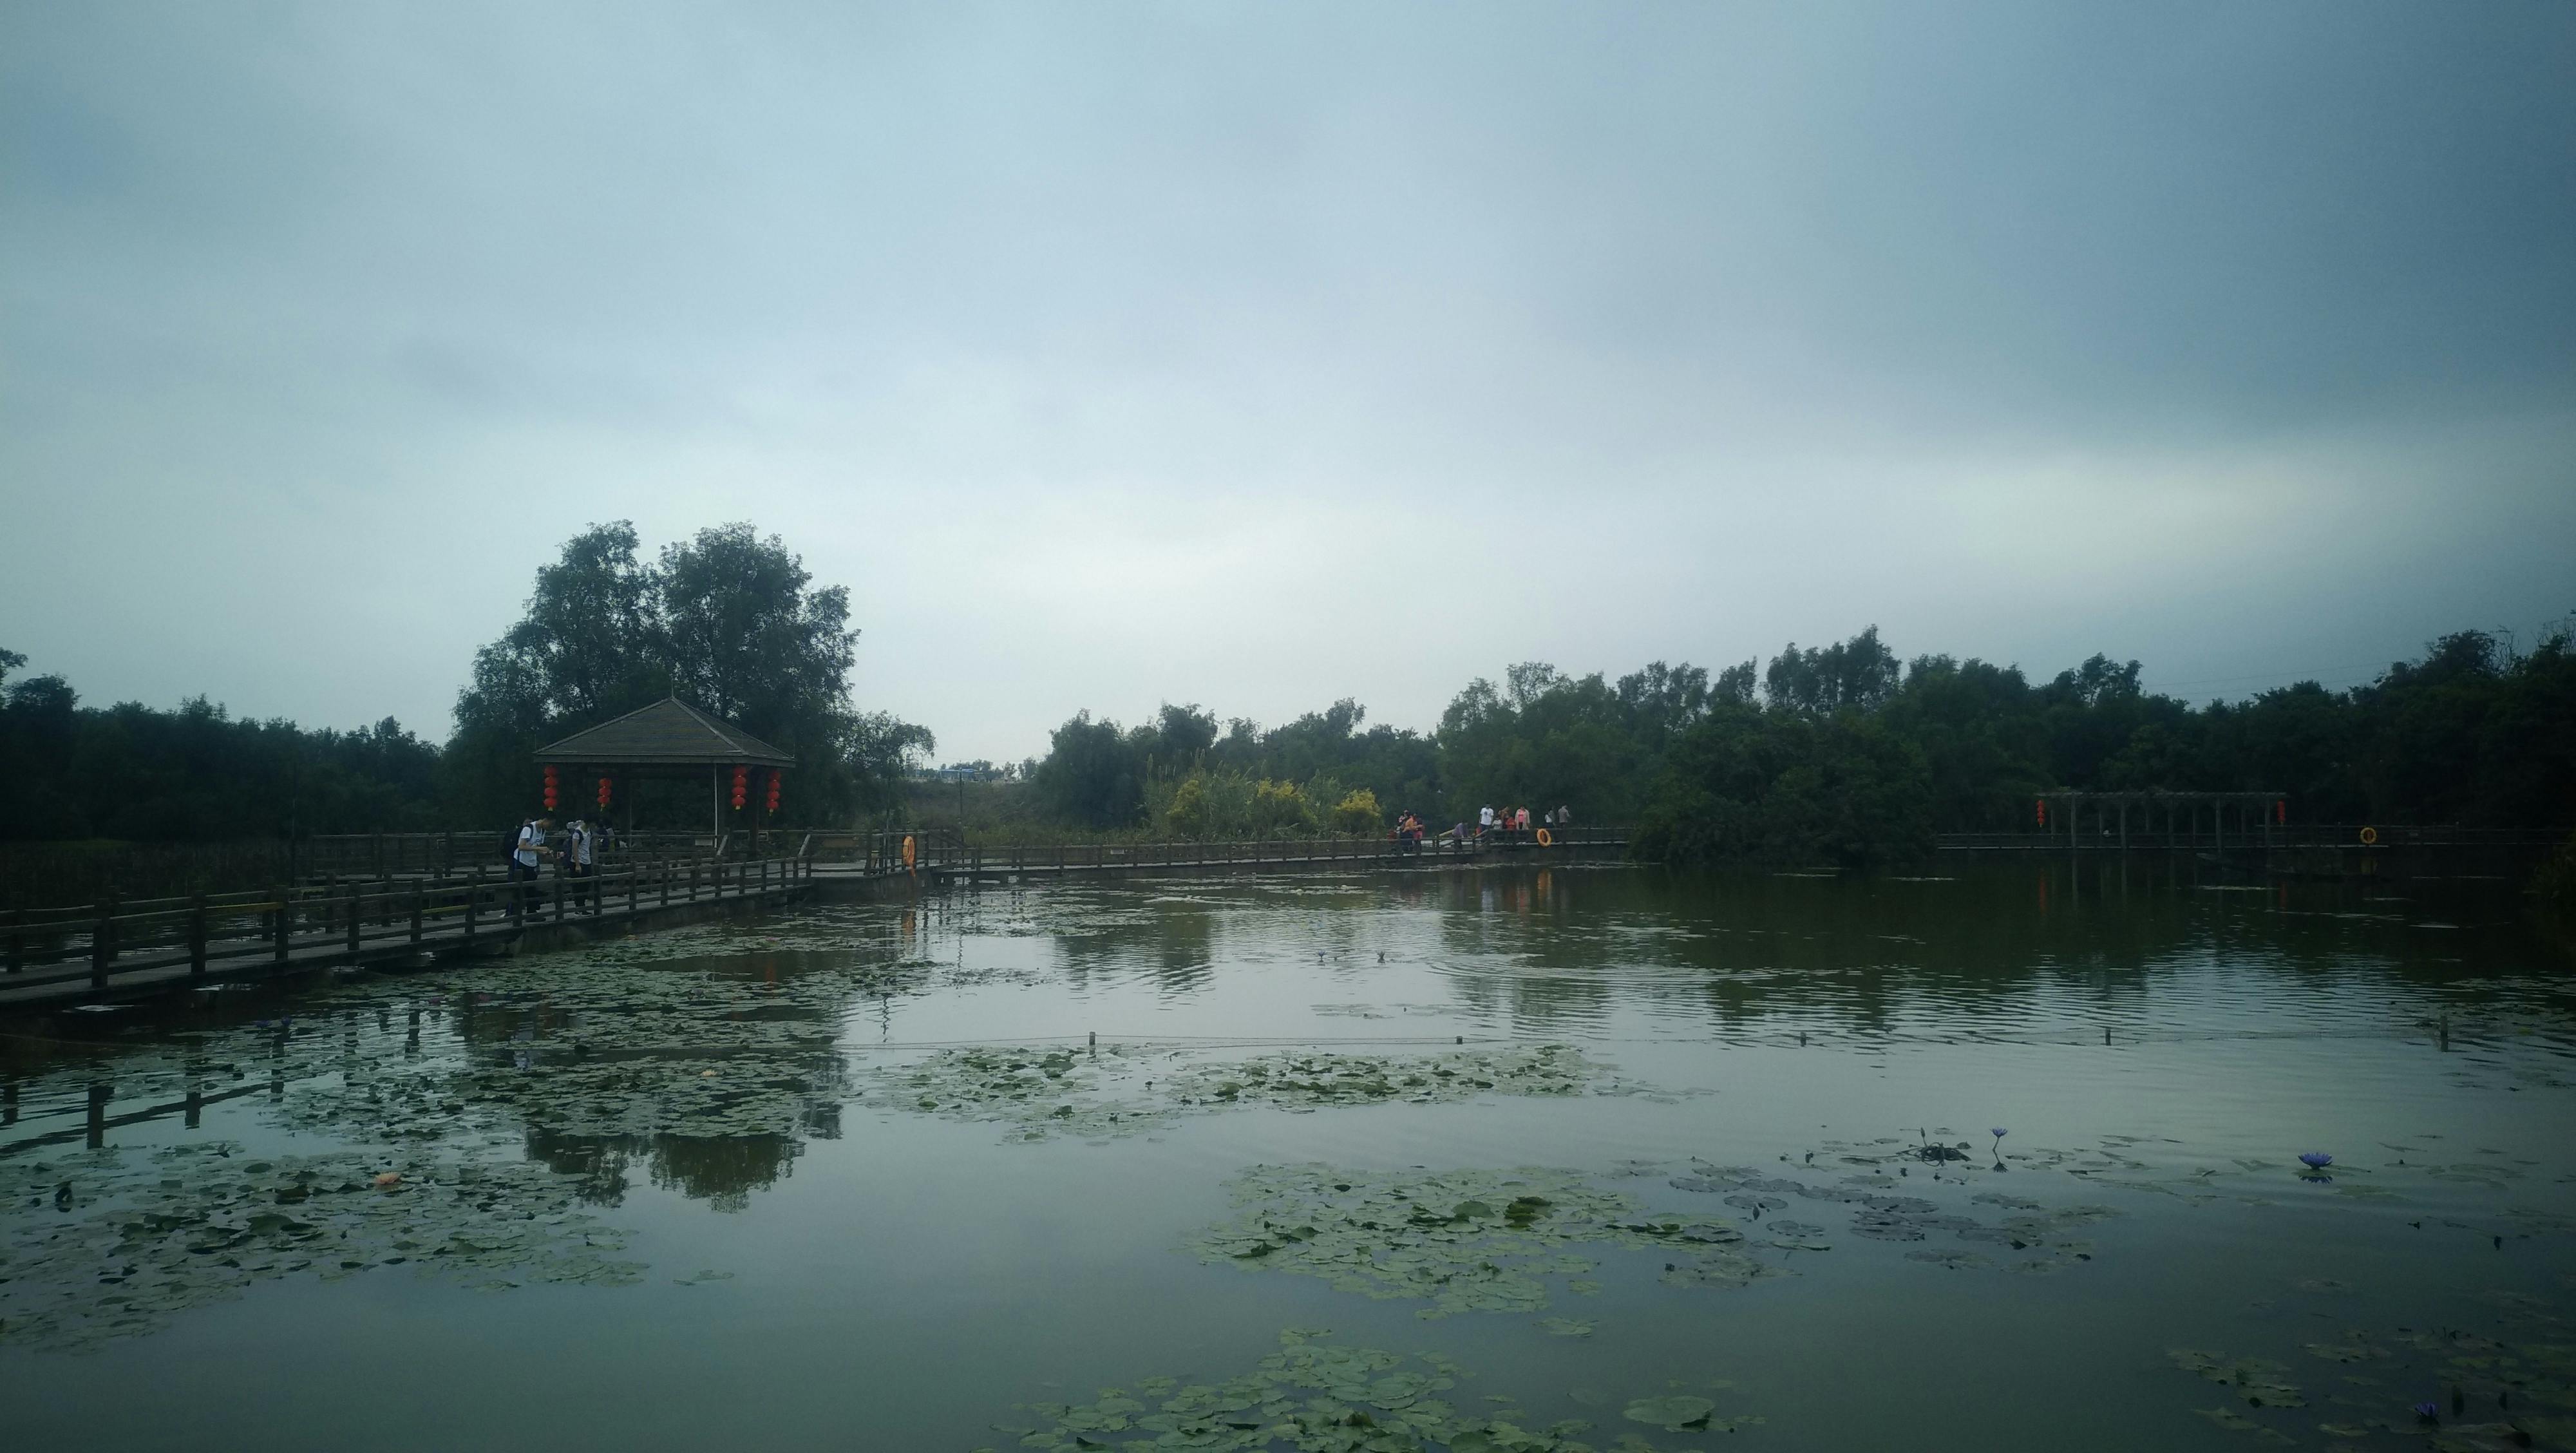 Free stock photo of Wetland Park in Guangzhou